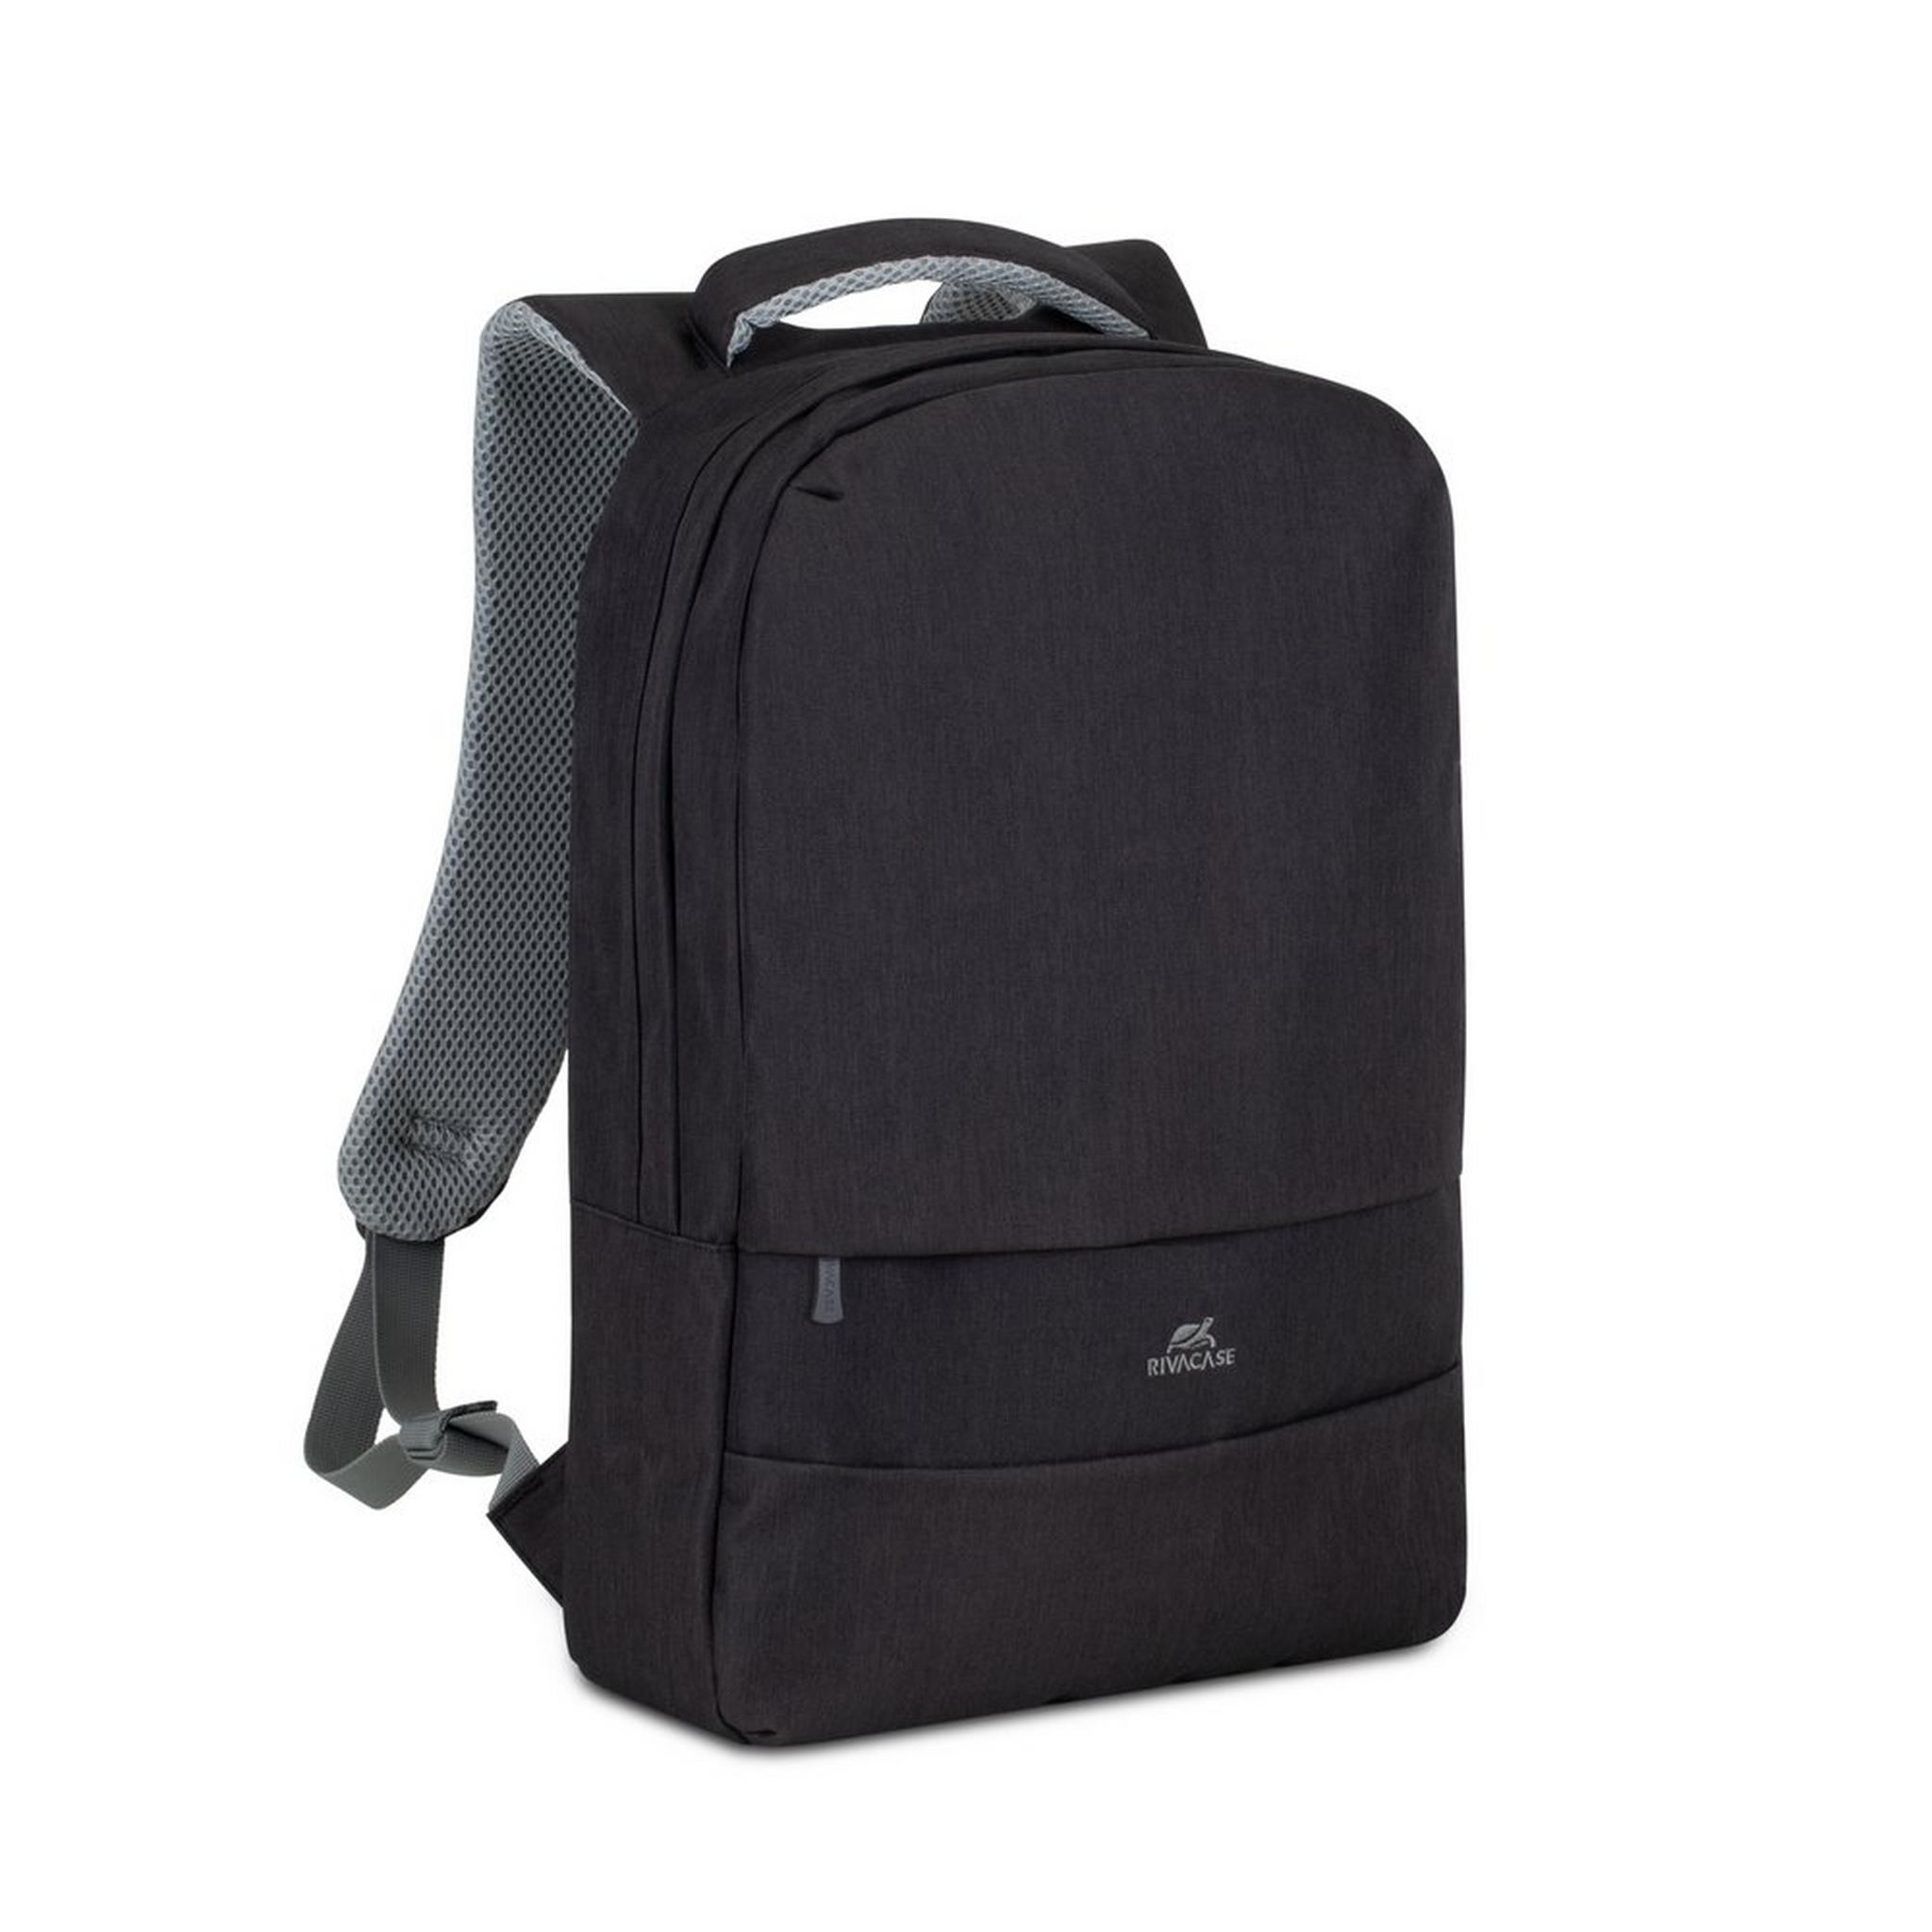 RIVACASE Prater Anti-Theft 15.6" Laptop Backpack - Black